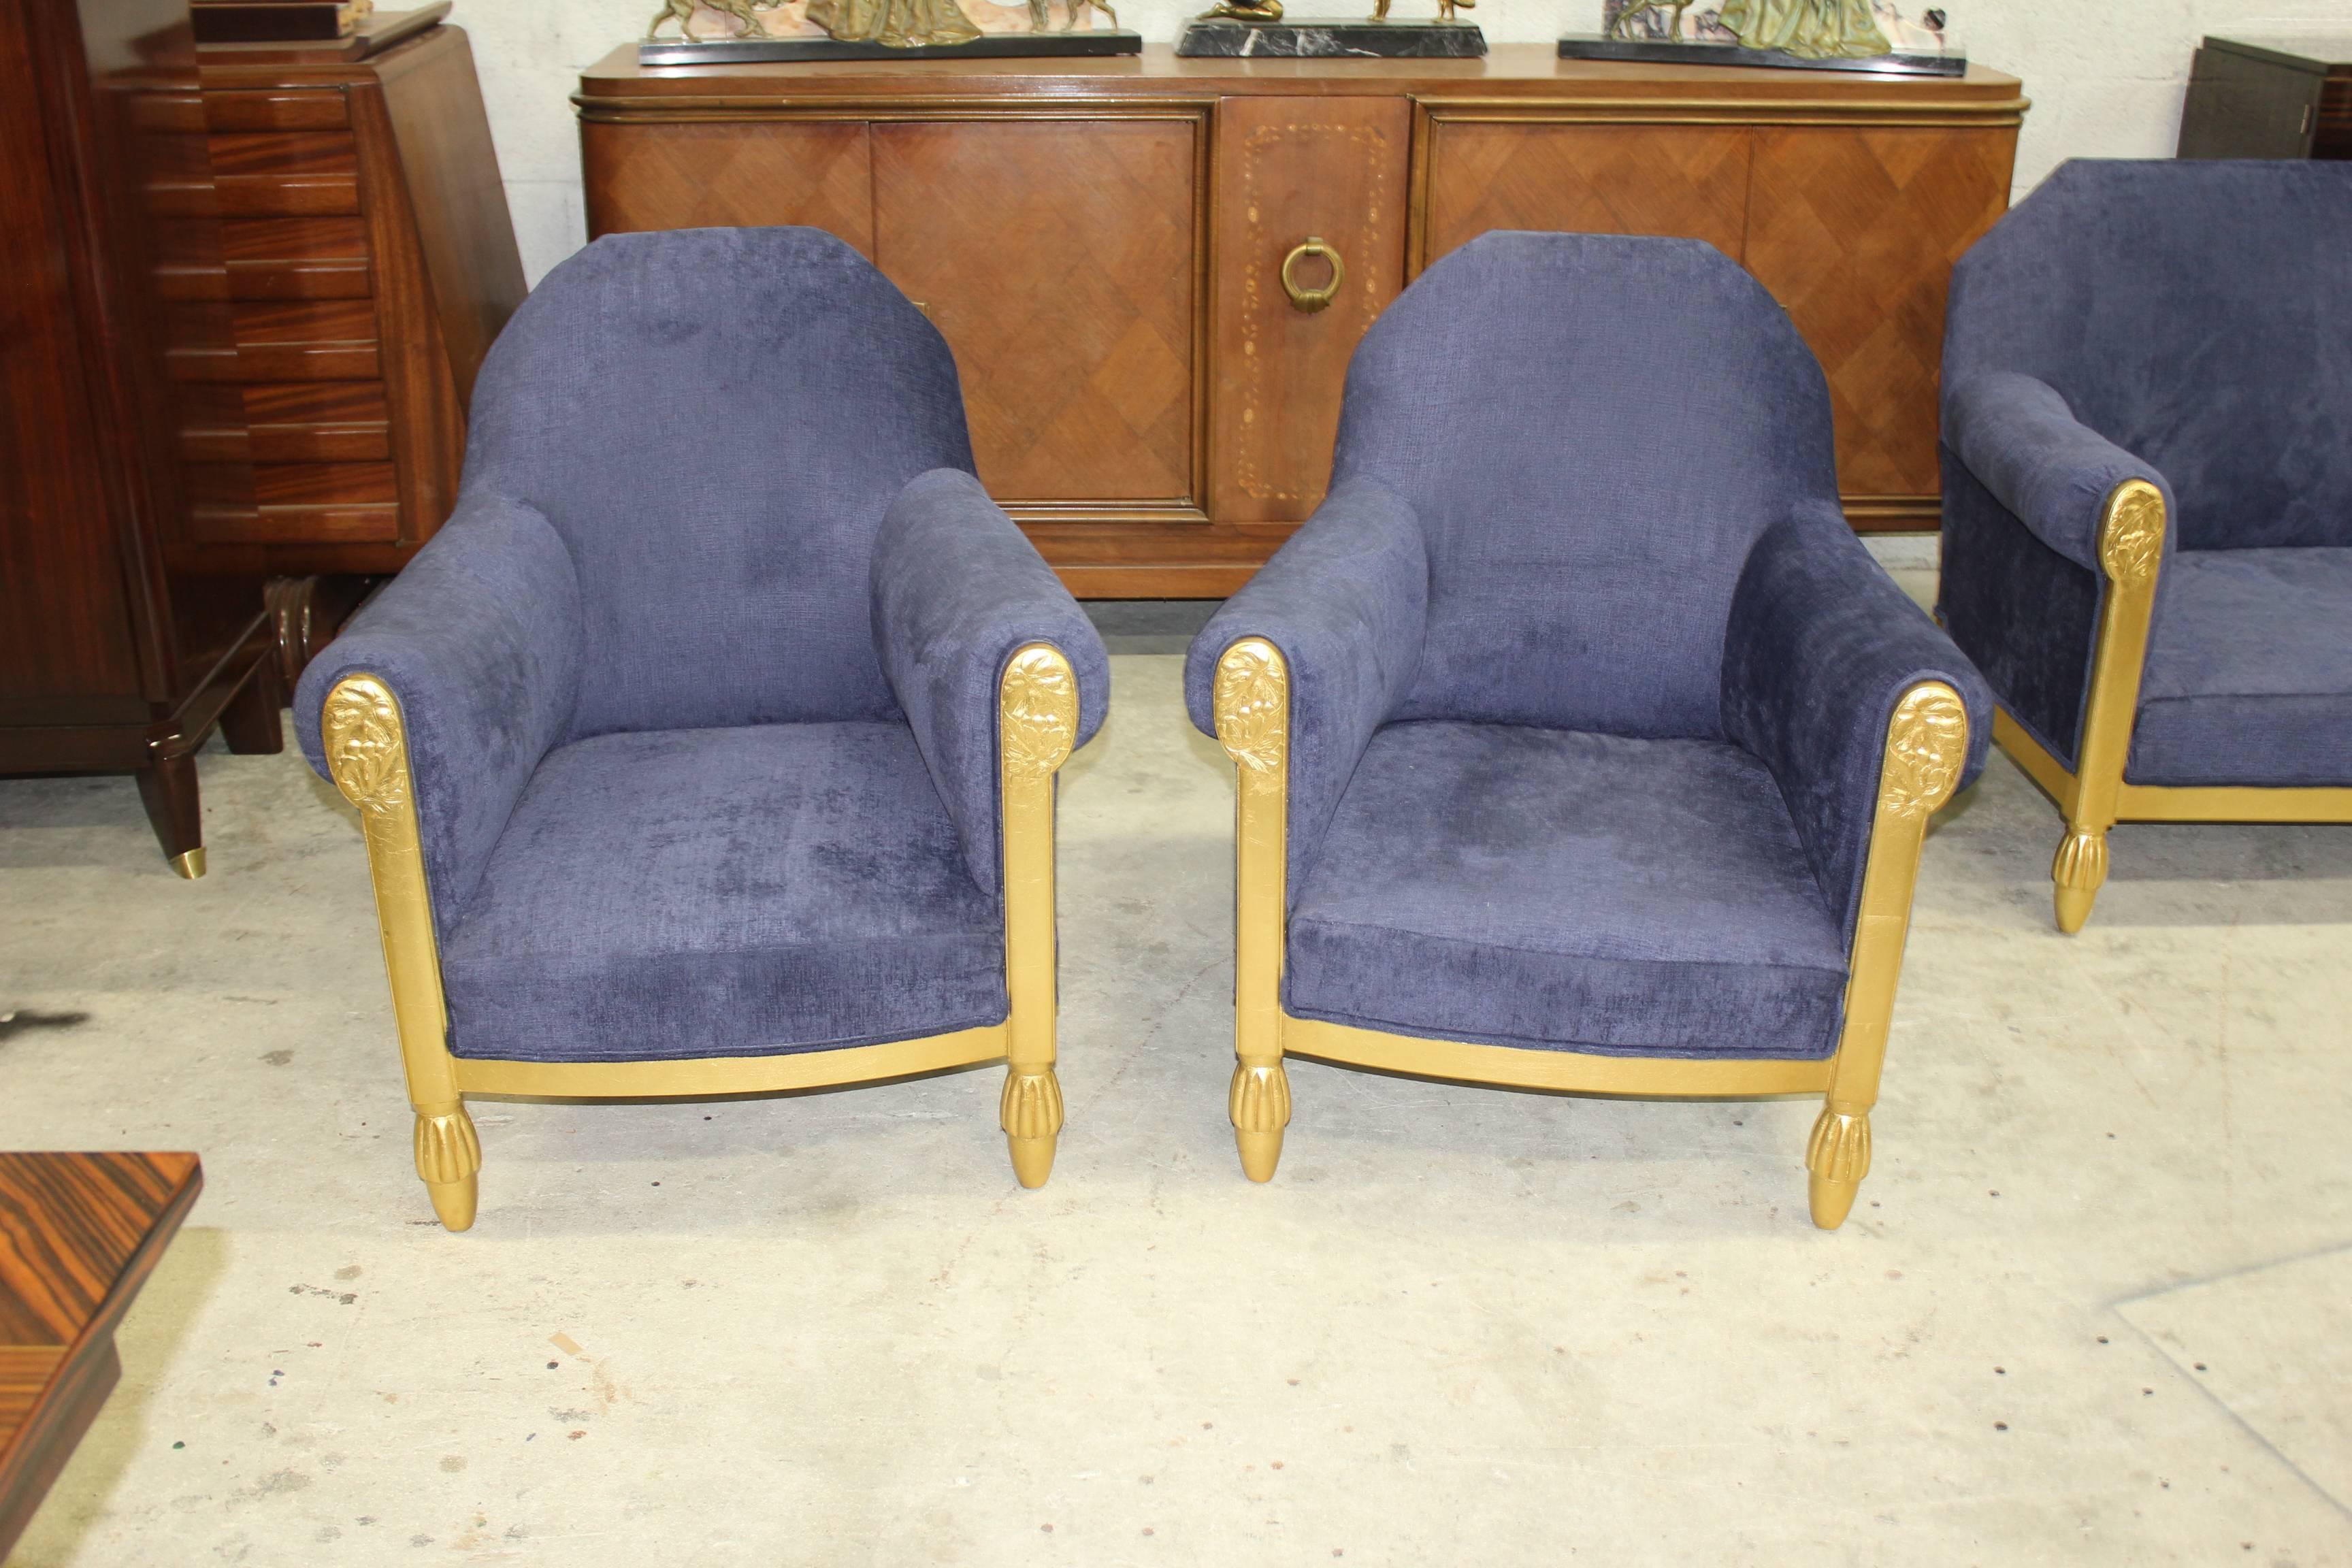 We present an elegant, pair of armchairs by one of the most important designers of the Art Deco period Paul Follot with gilded wood and decorative carved panels, Classic early 1920s , all of which have been newly re-upholstered in royal blue velvet